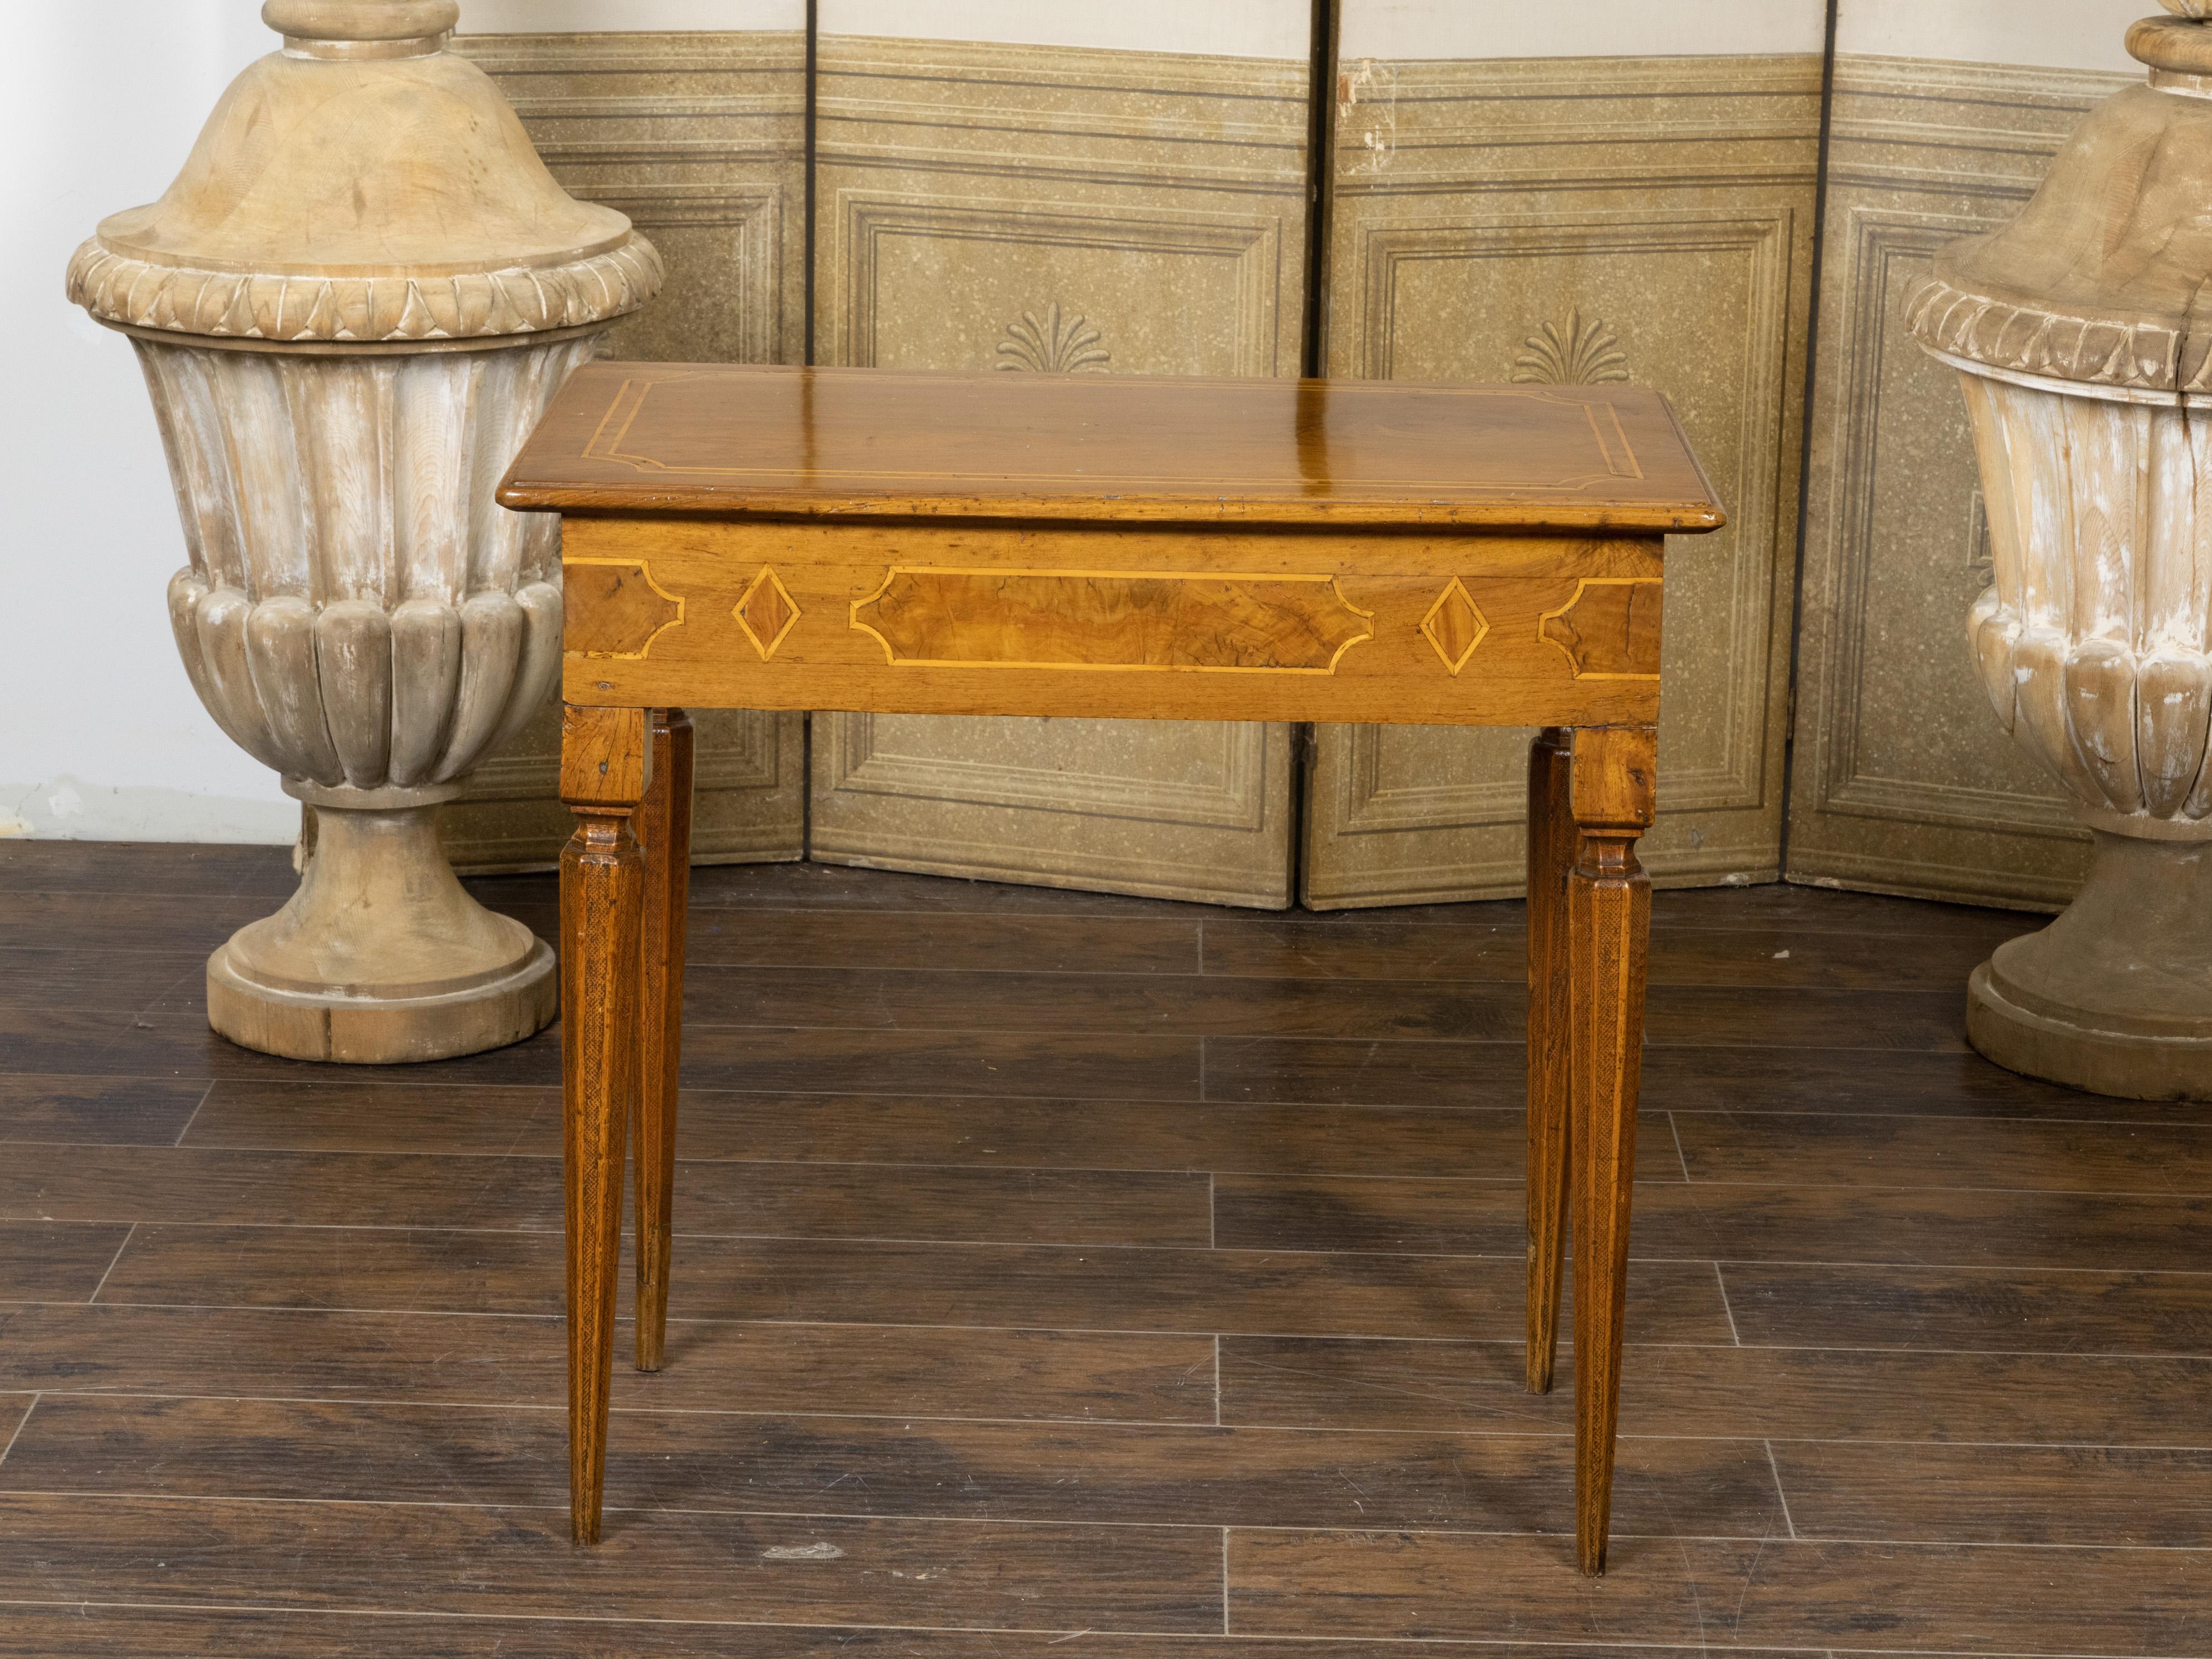 An Italian Neoclassical period walnut console table from the 18th century, with cross banding and faceted tapering legs. Created in Italy during the 18th century, this Neoclassical walnut console table features a slightly raised rectangular top with